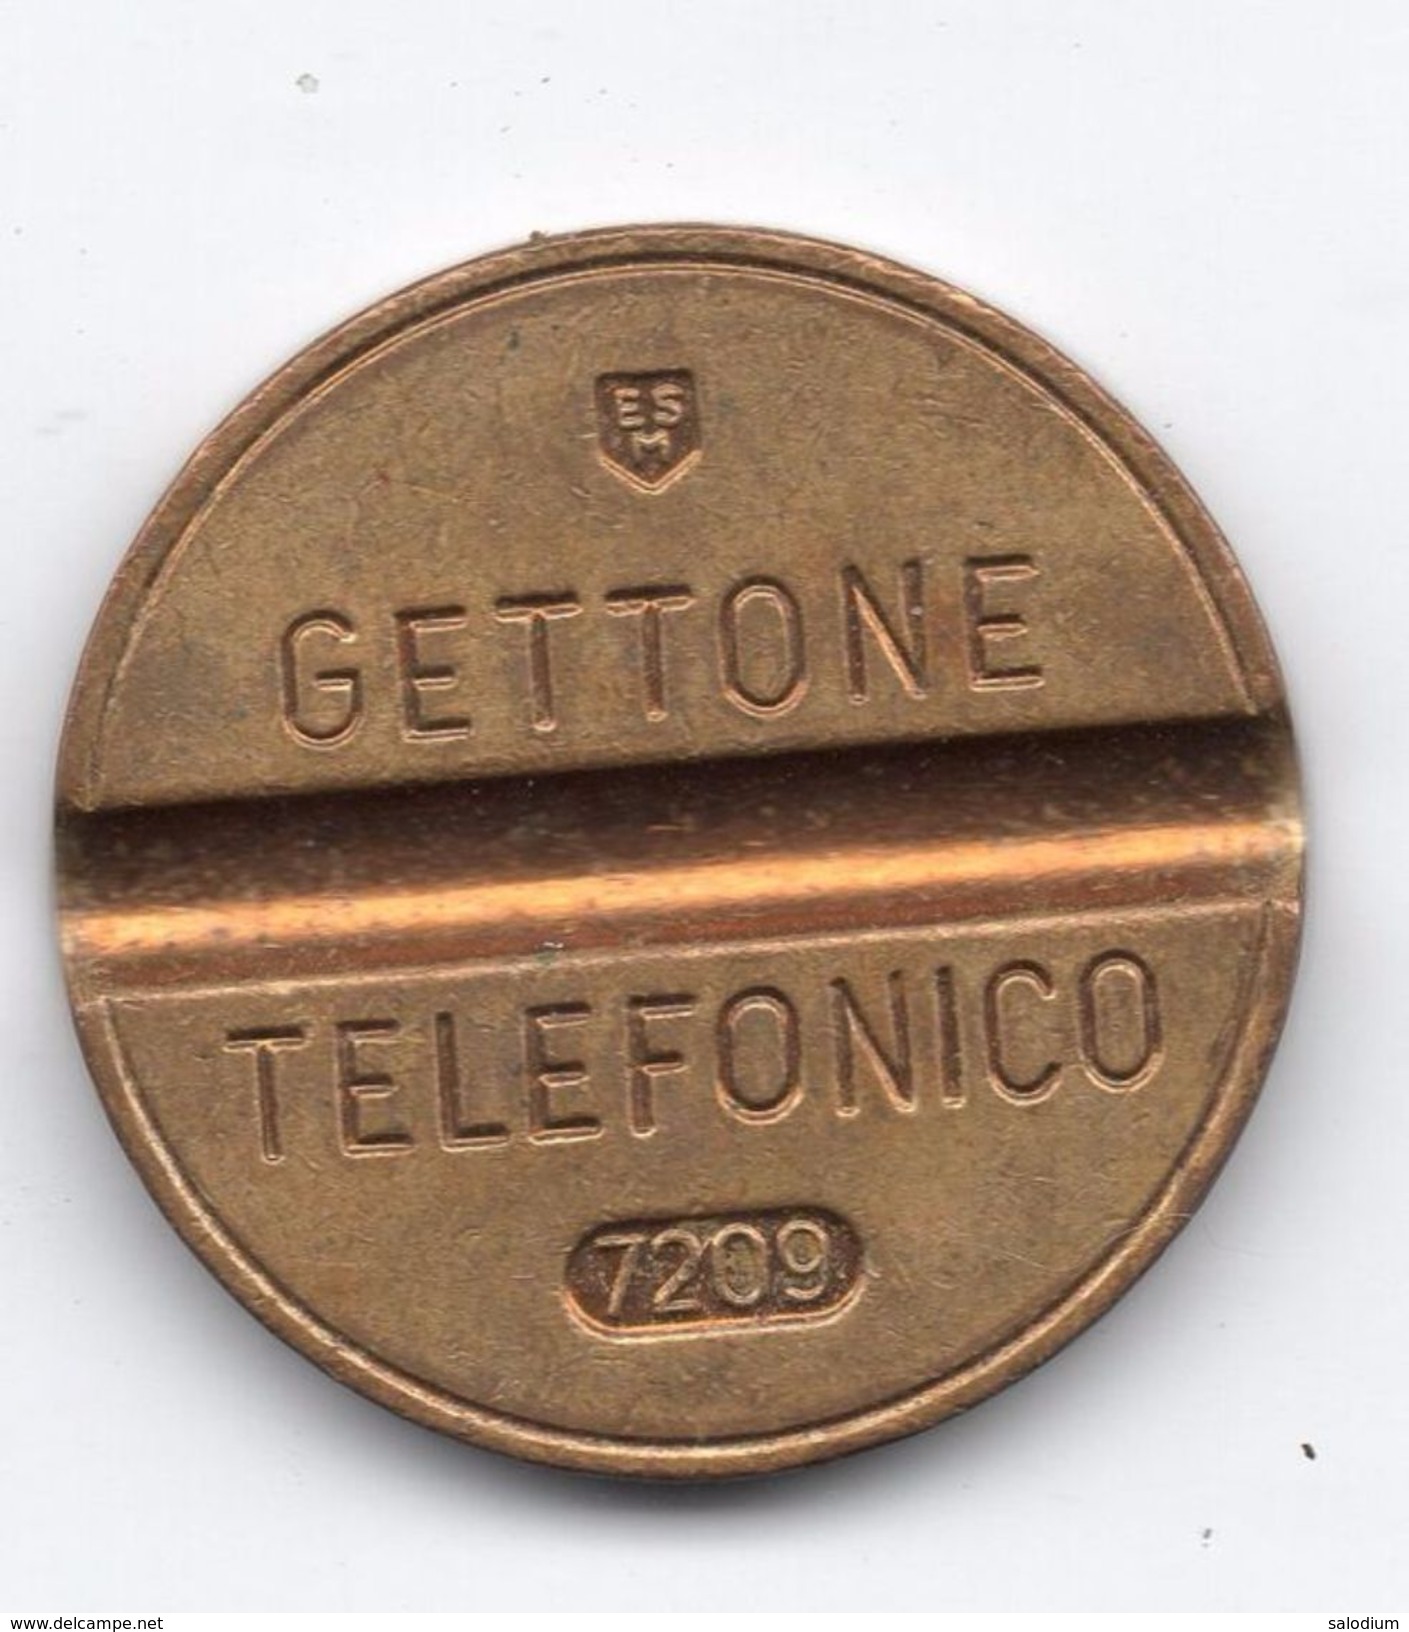 Gettone Telefonico 7209 Token Telephone - (Id-786) - Professionals/Firms